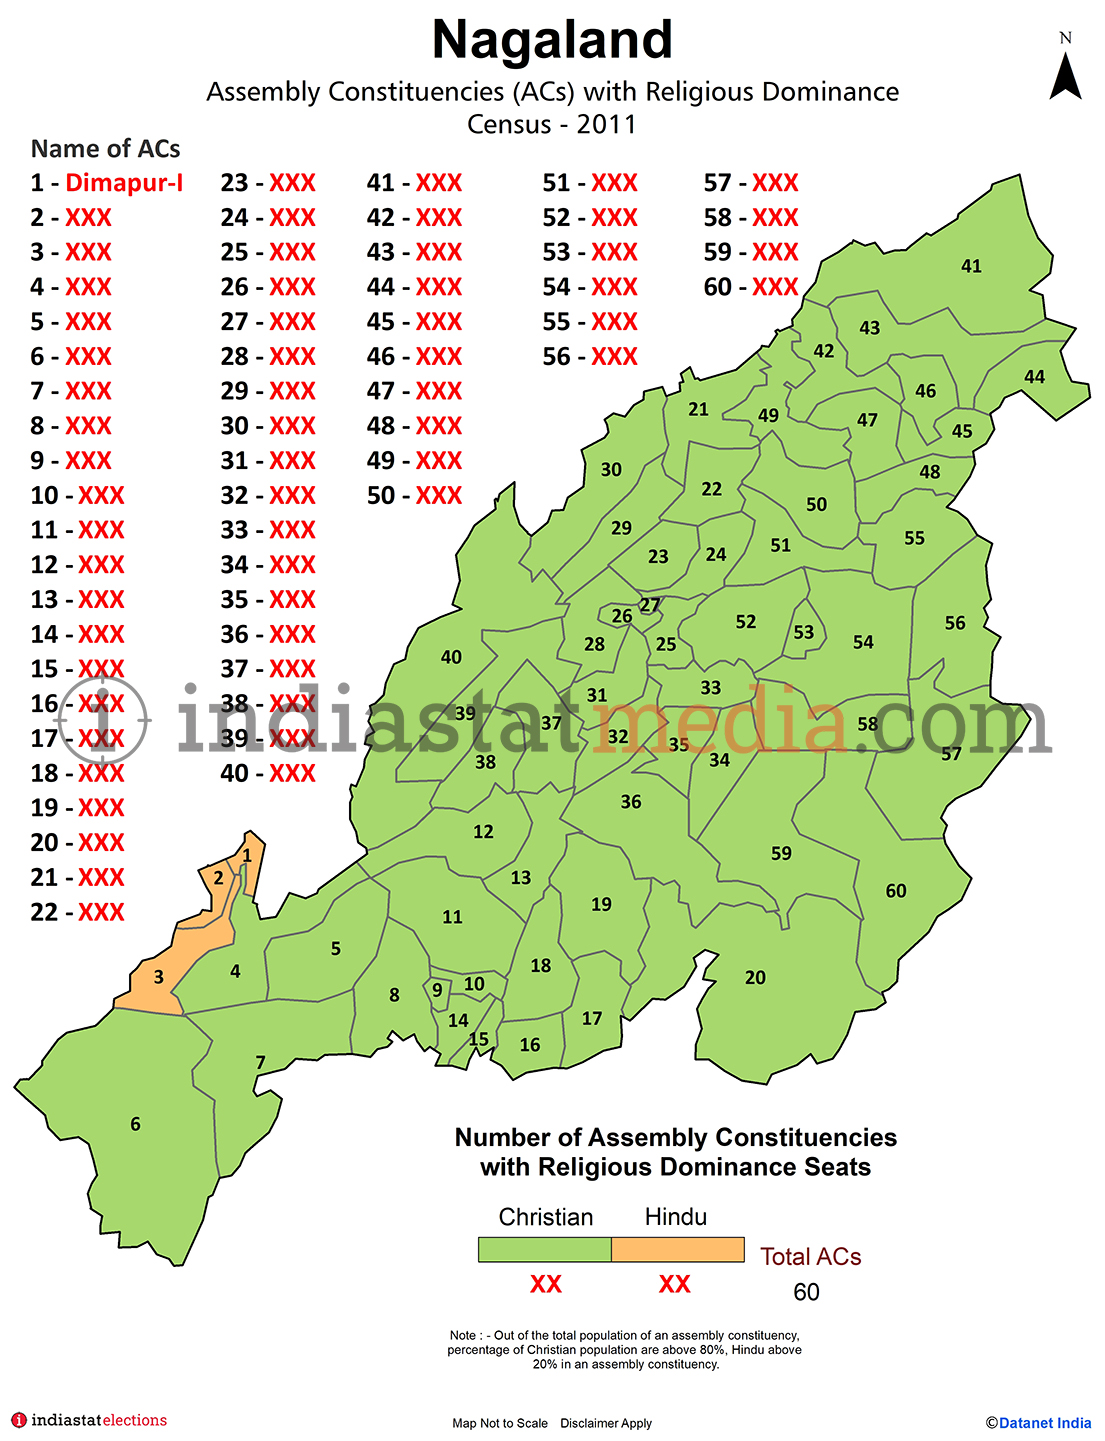 Assembly Constituencies (ACs) with Religious Dominance in Nagaland - Census 2011